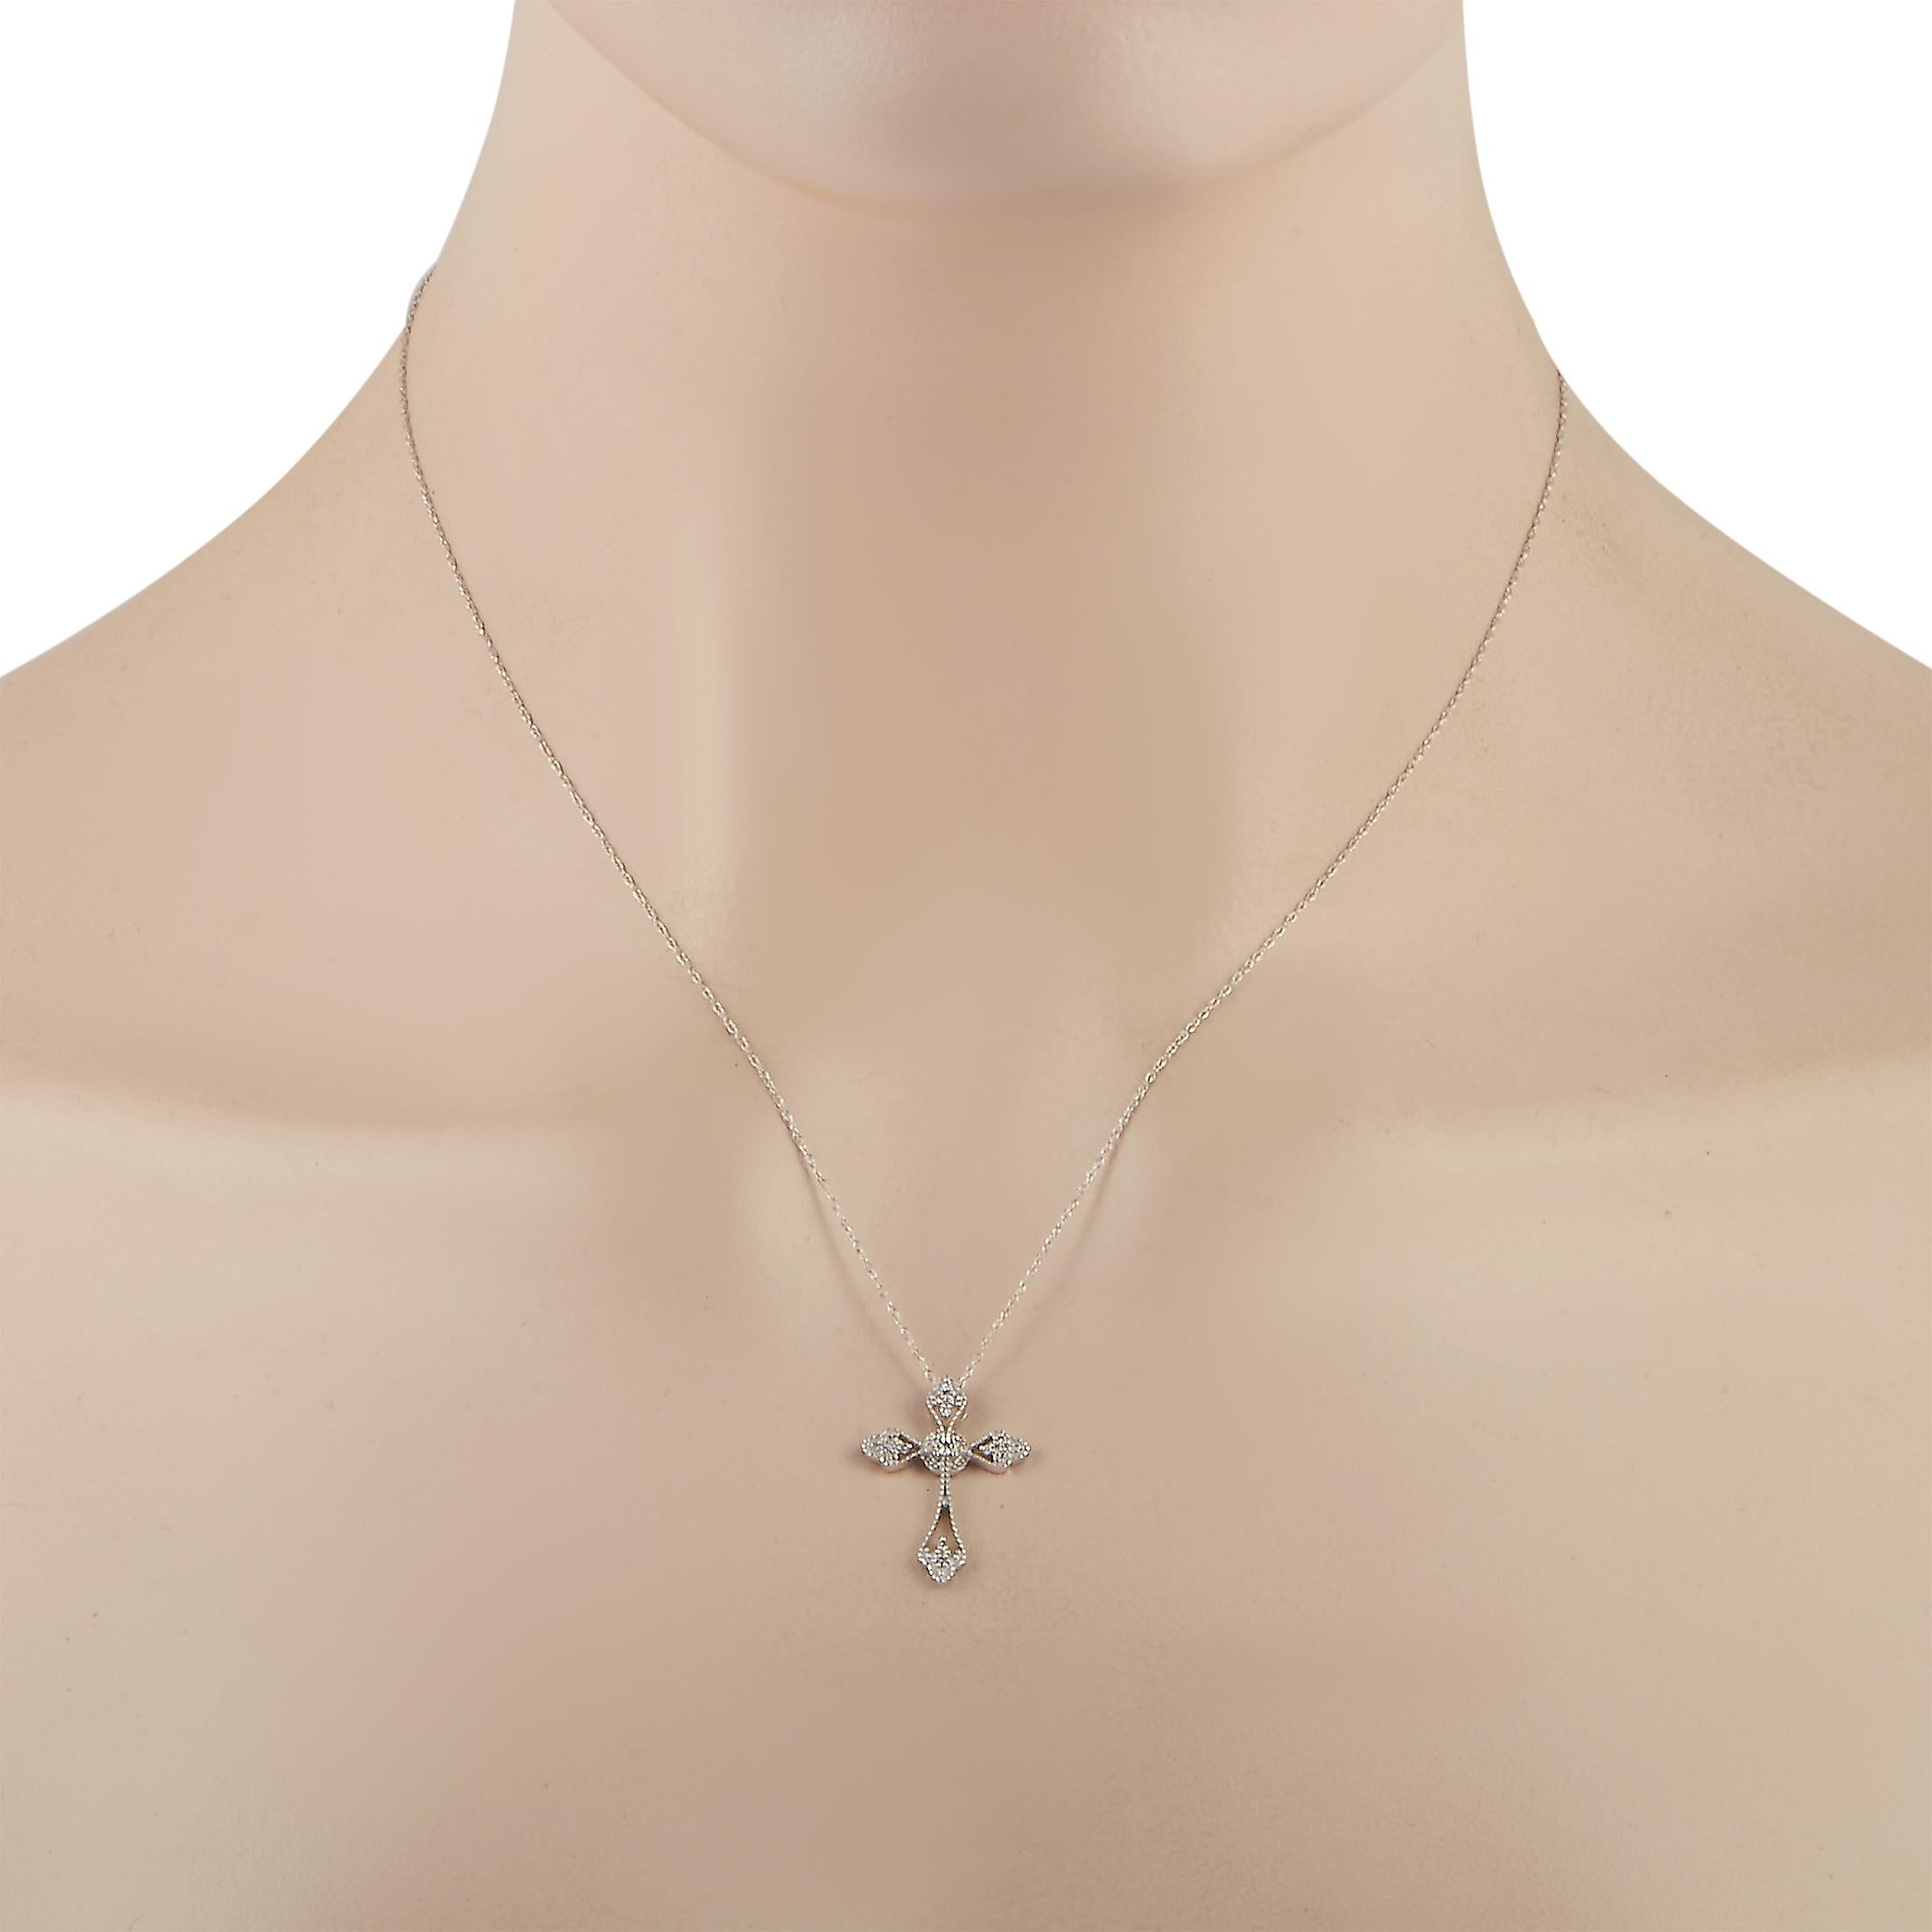 This LB Exclusive necklace is made of 14K white gold and weighs 1.3 grams. It is presented with an 18” chain and a cross pendant that measures 1” in length and 0.50” in width. The necklace is embellished with diamonds that amount to 0.10 carats.
